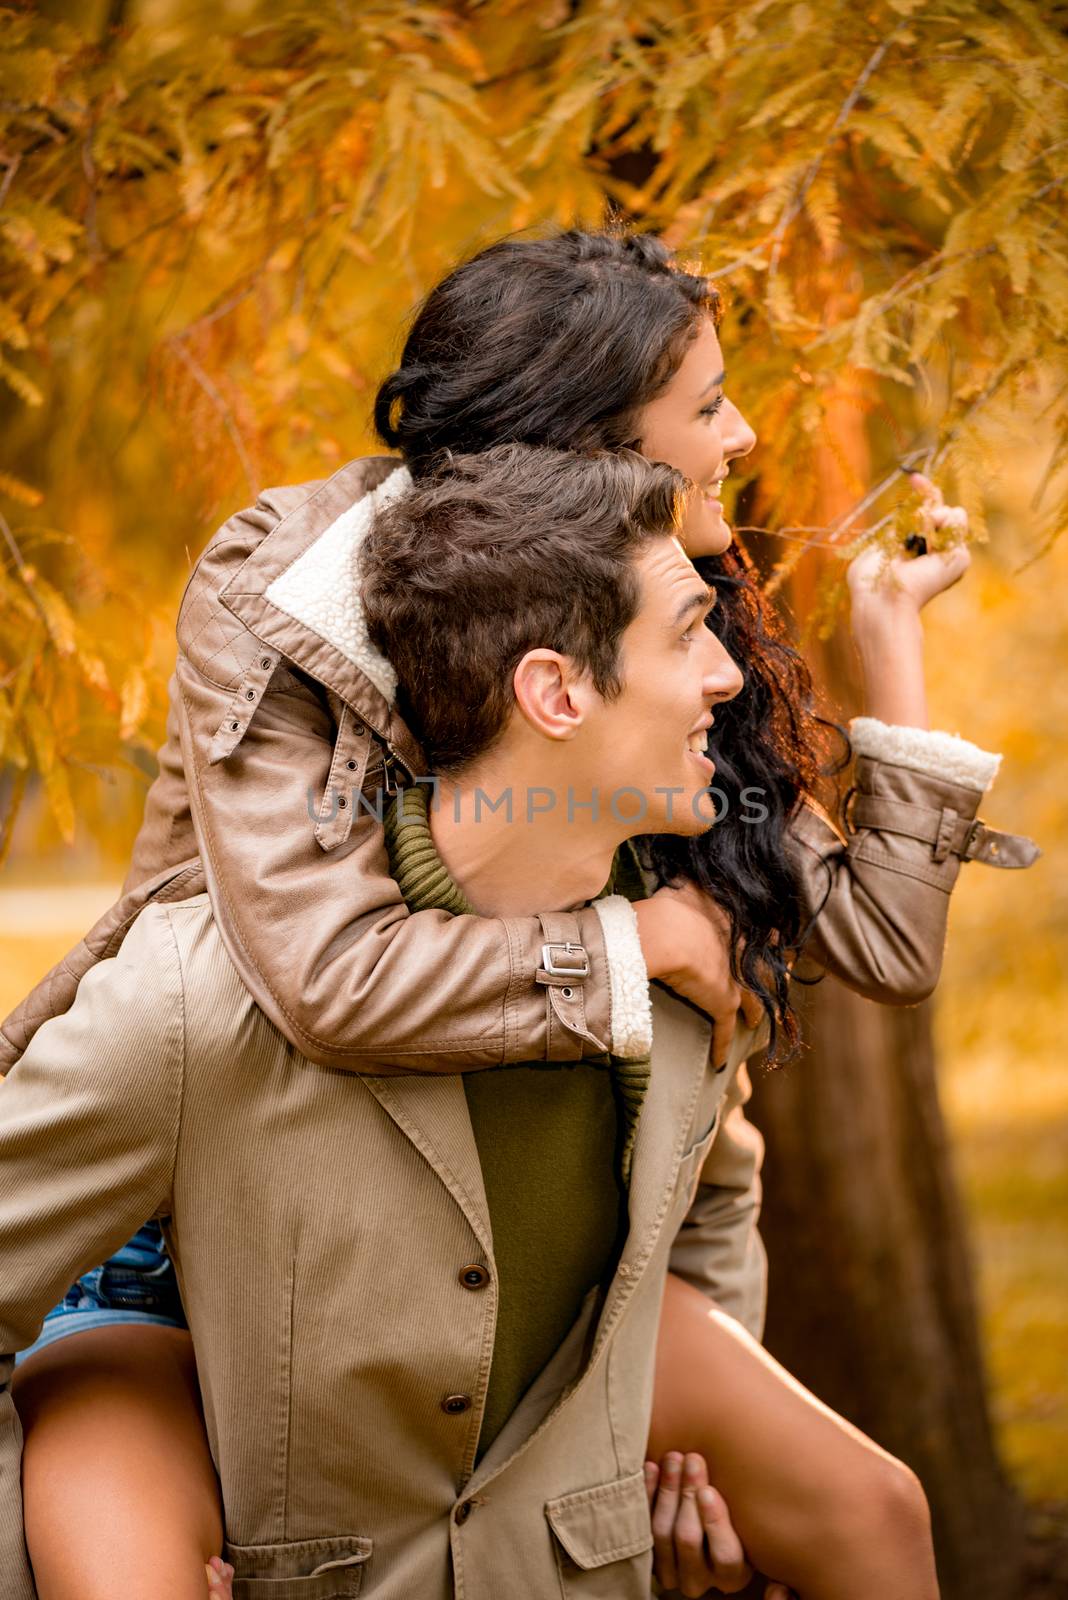 Beautiful young couple enjoying autumn day in the park.